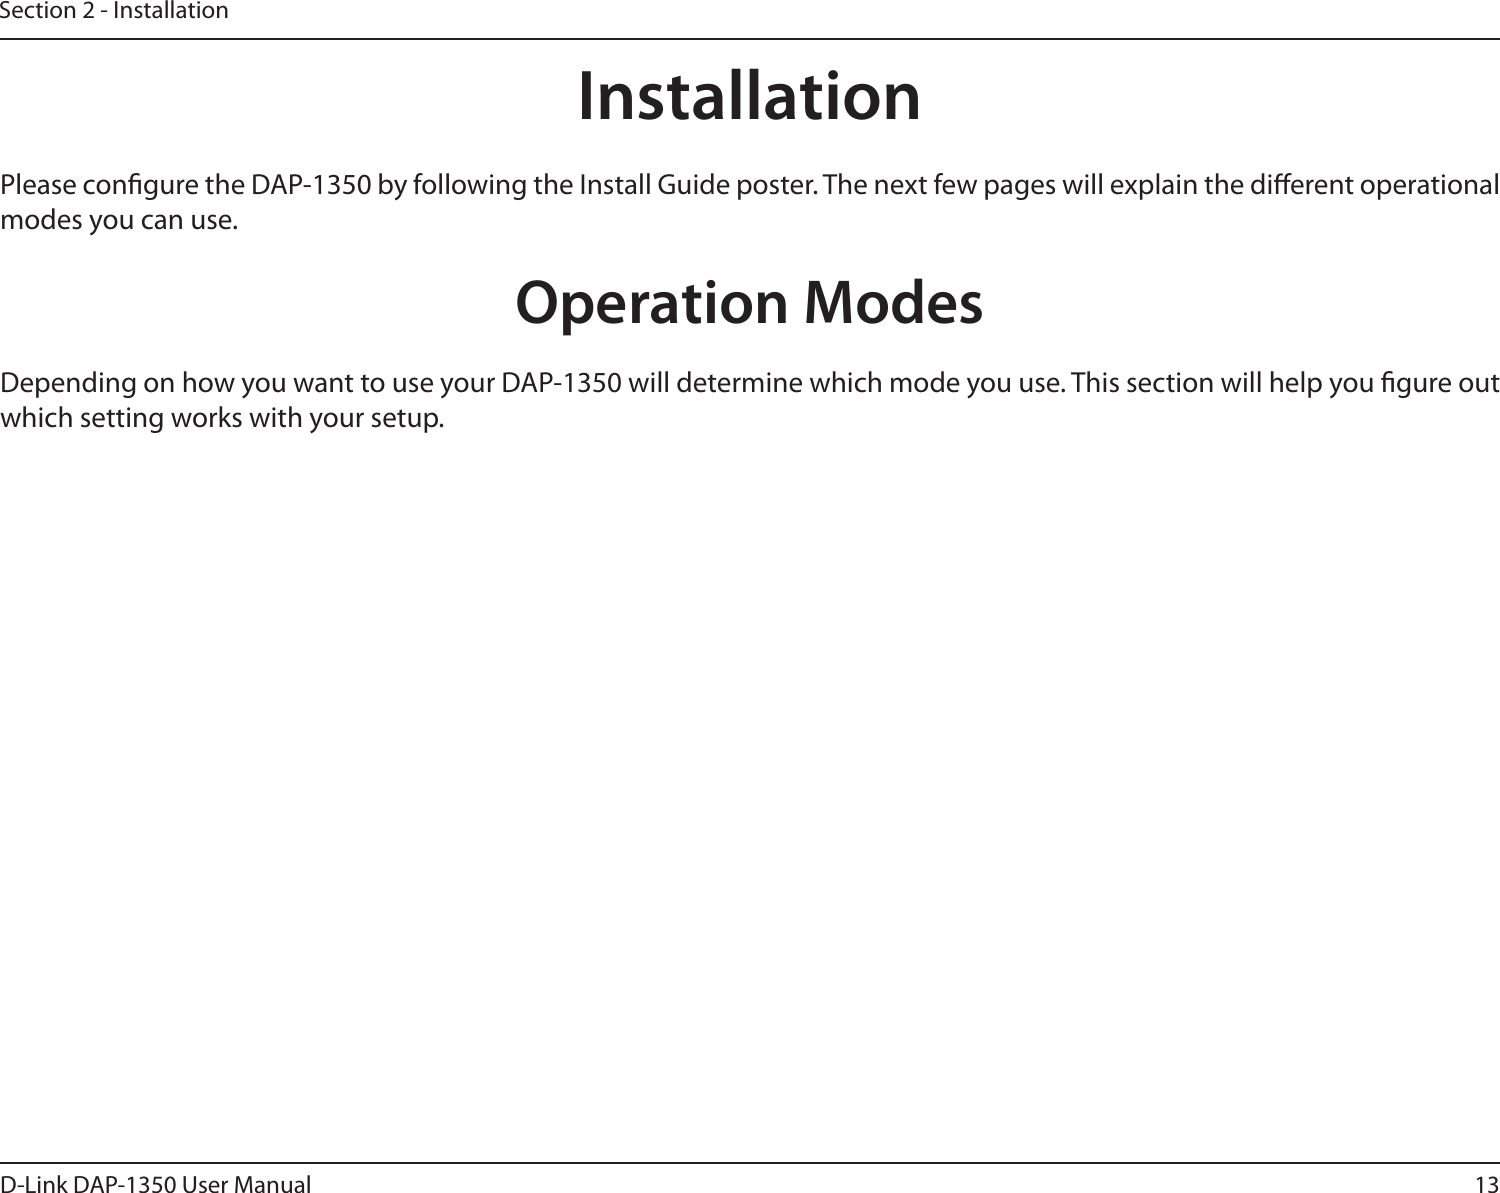 13D-Link DAP-1350 User ManualSection 2 - InstallationInstallationPlease congure the DAP-1350 by following the Install Guide poster. The next few pages will explain the dierent operational modes you can use. Operation ModesDepending on how you want to use your DAP-1350 will determine which mode you use. This section will help you gure out which setting works with your setup.